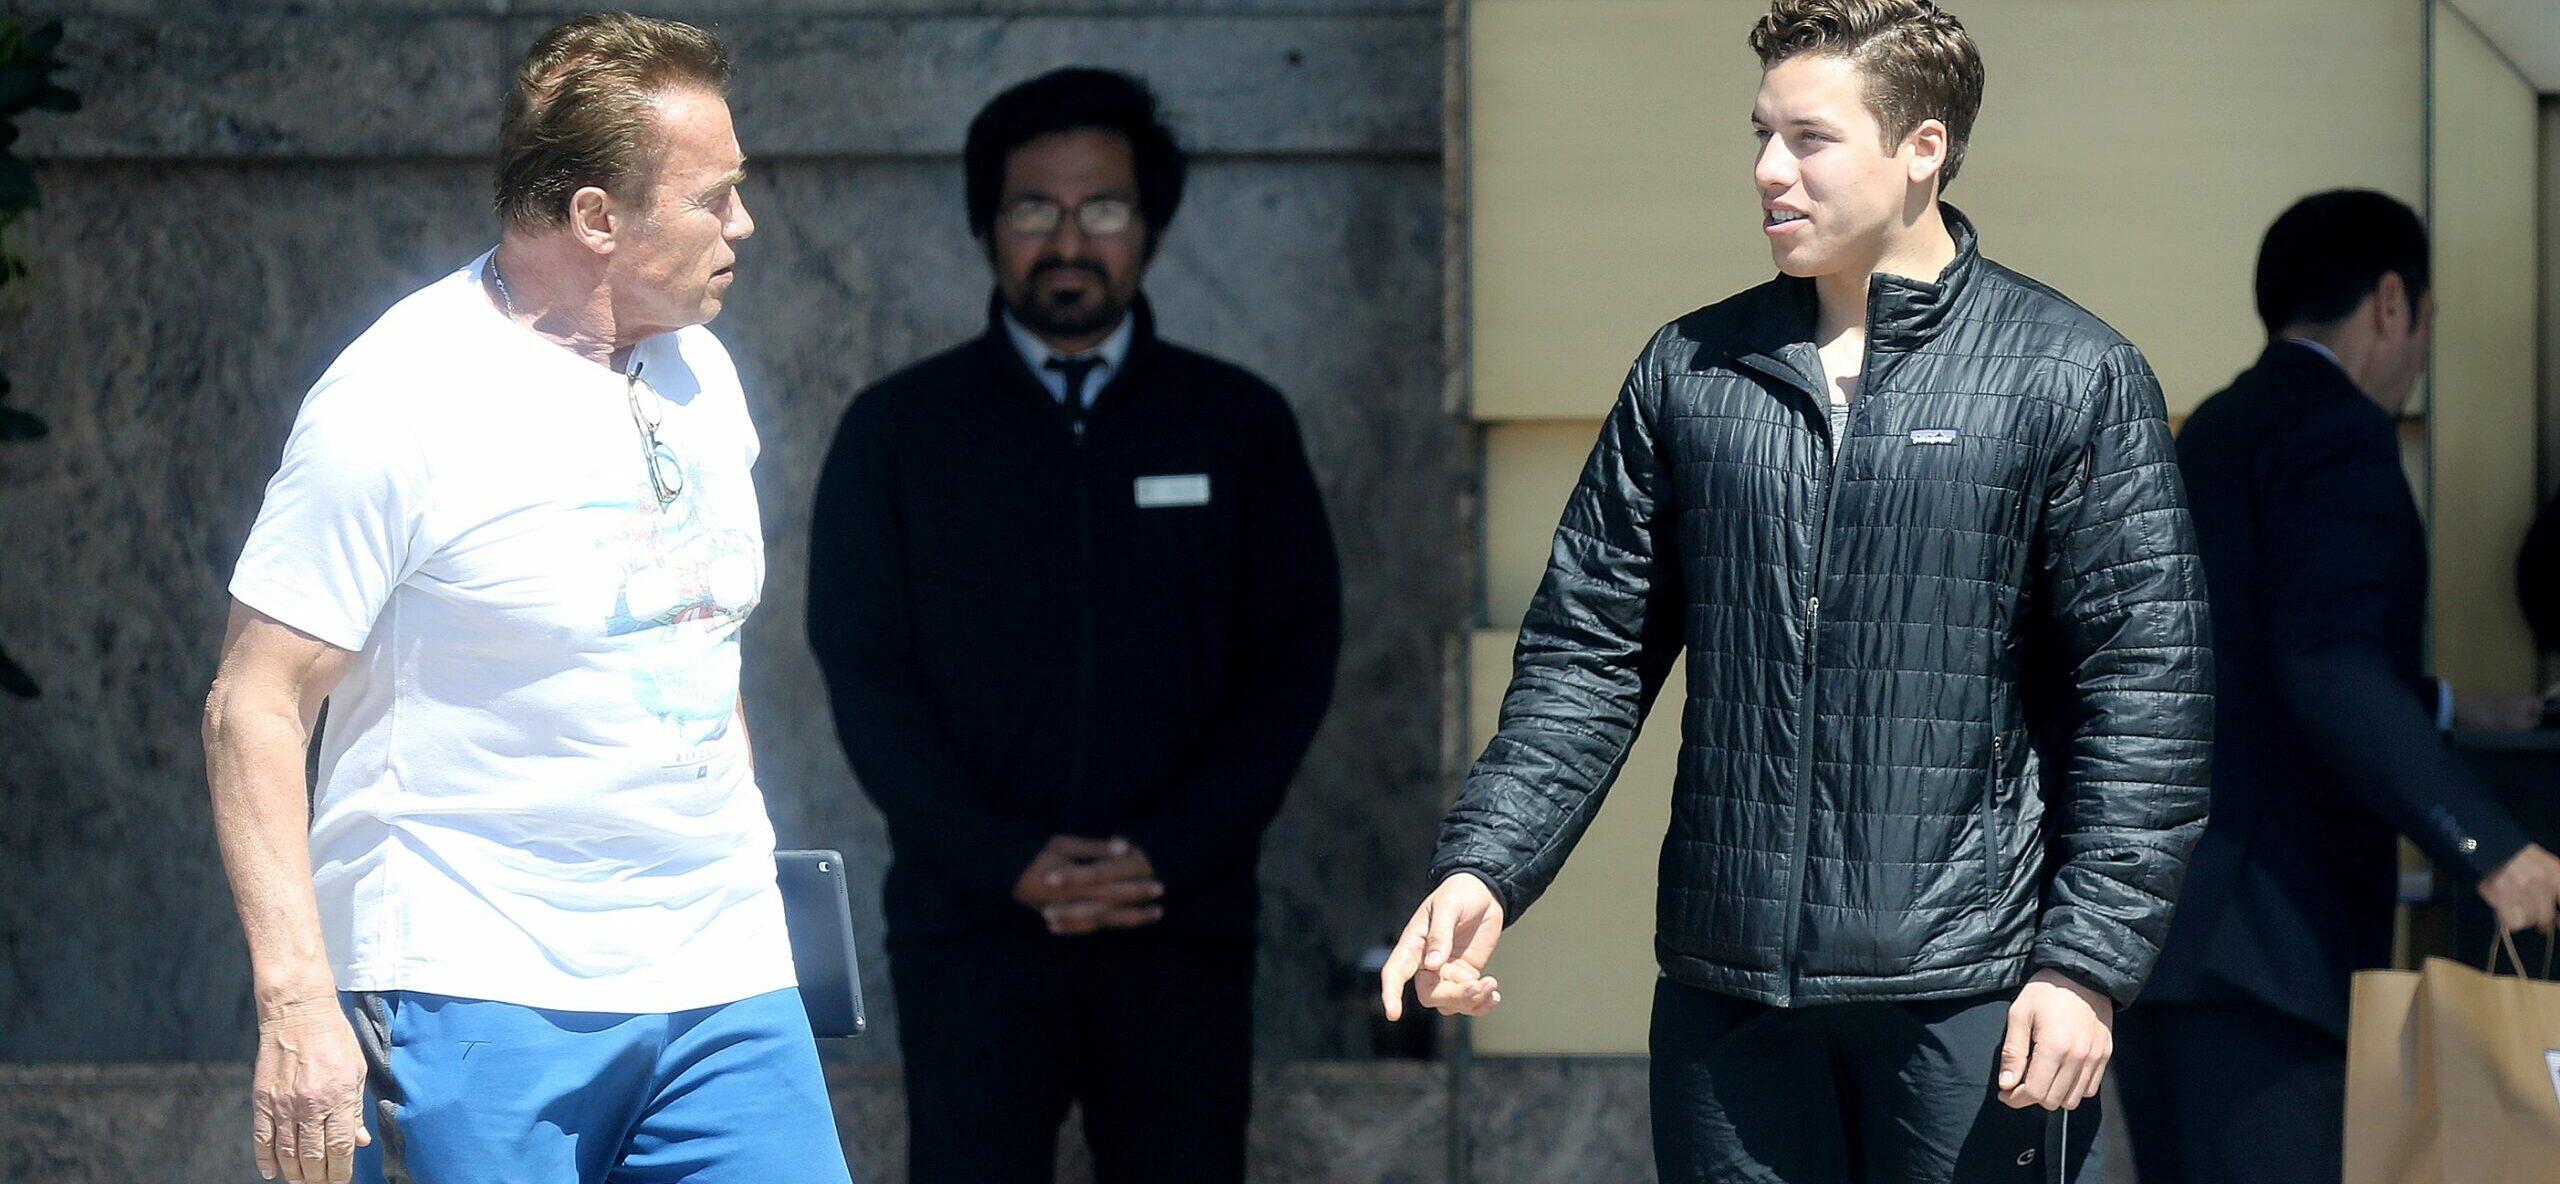 Arnold Schwarzenegger Dragged Into $1 Million Lawsuit Over Son’s Car Accident